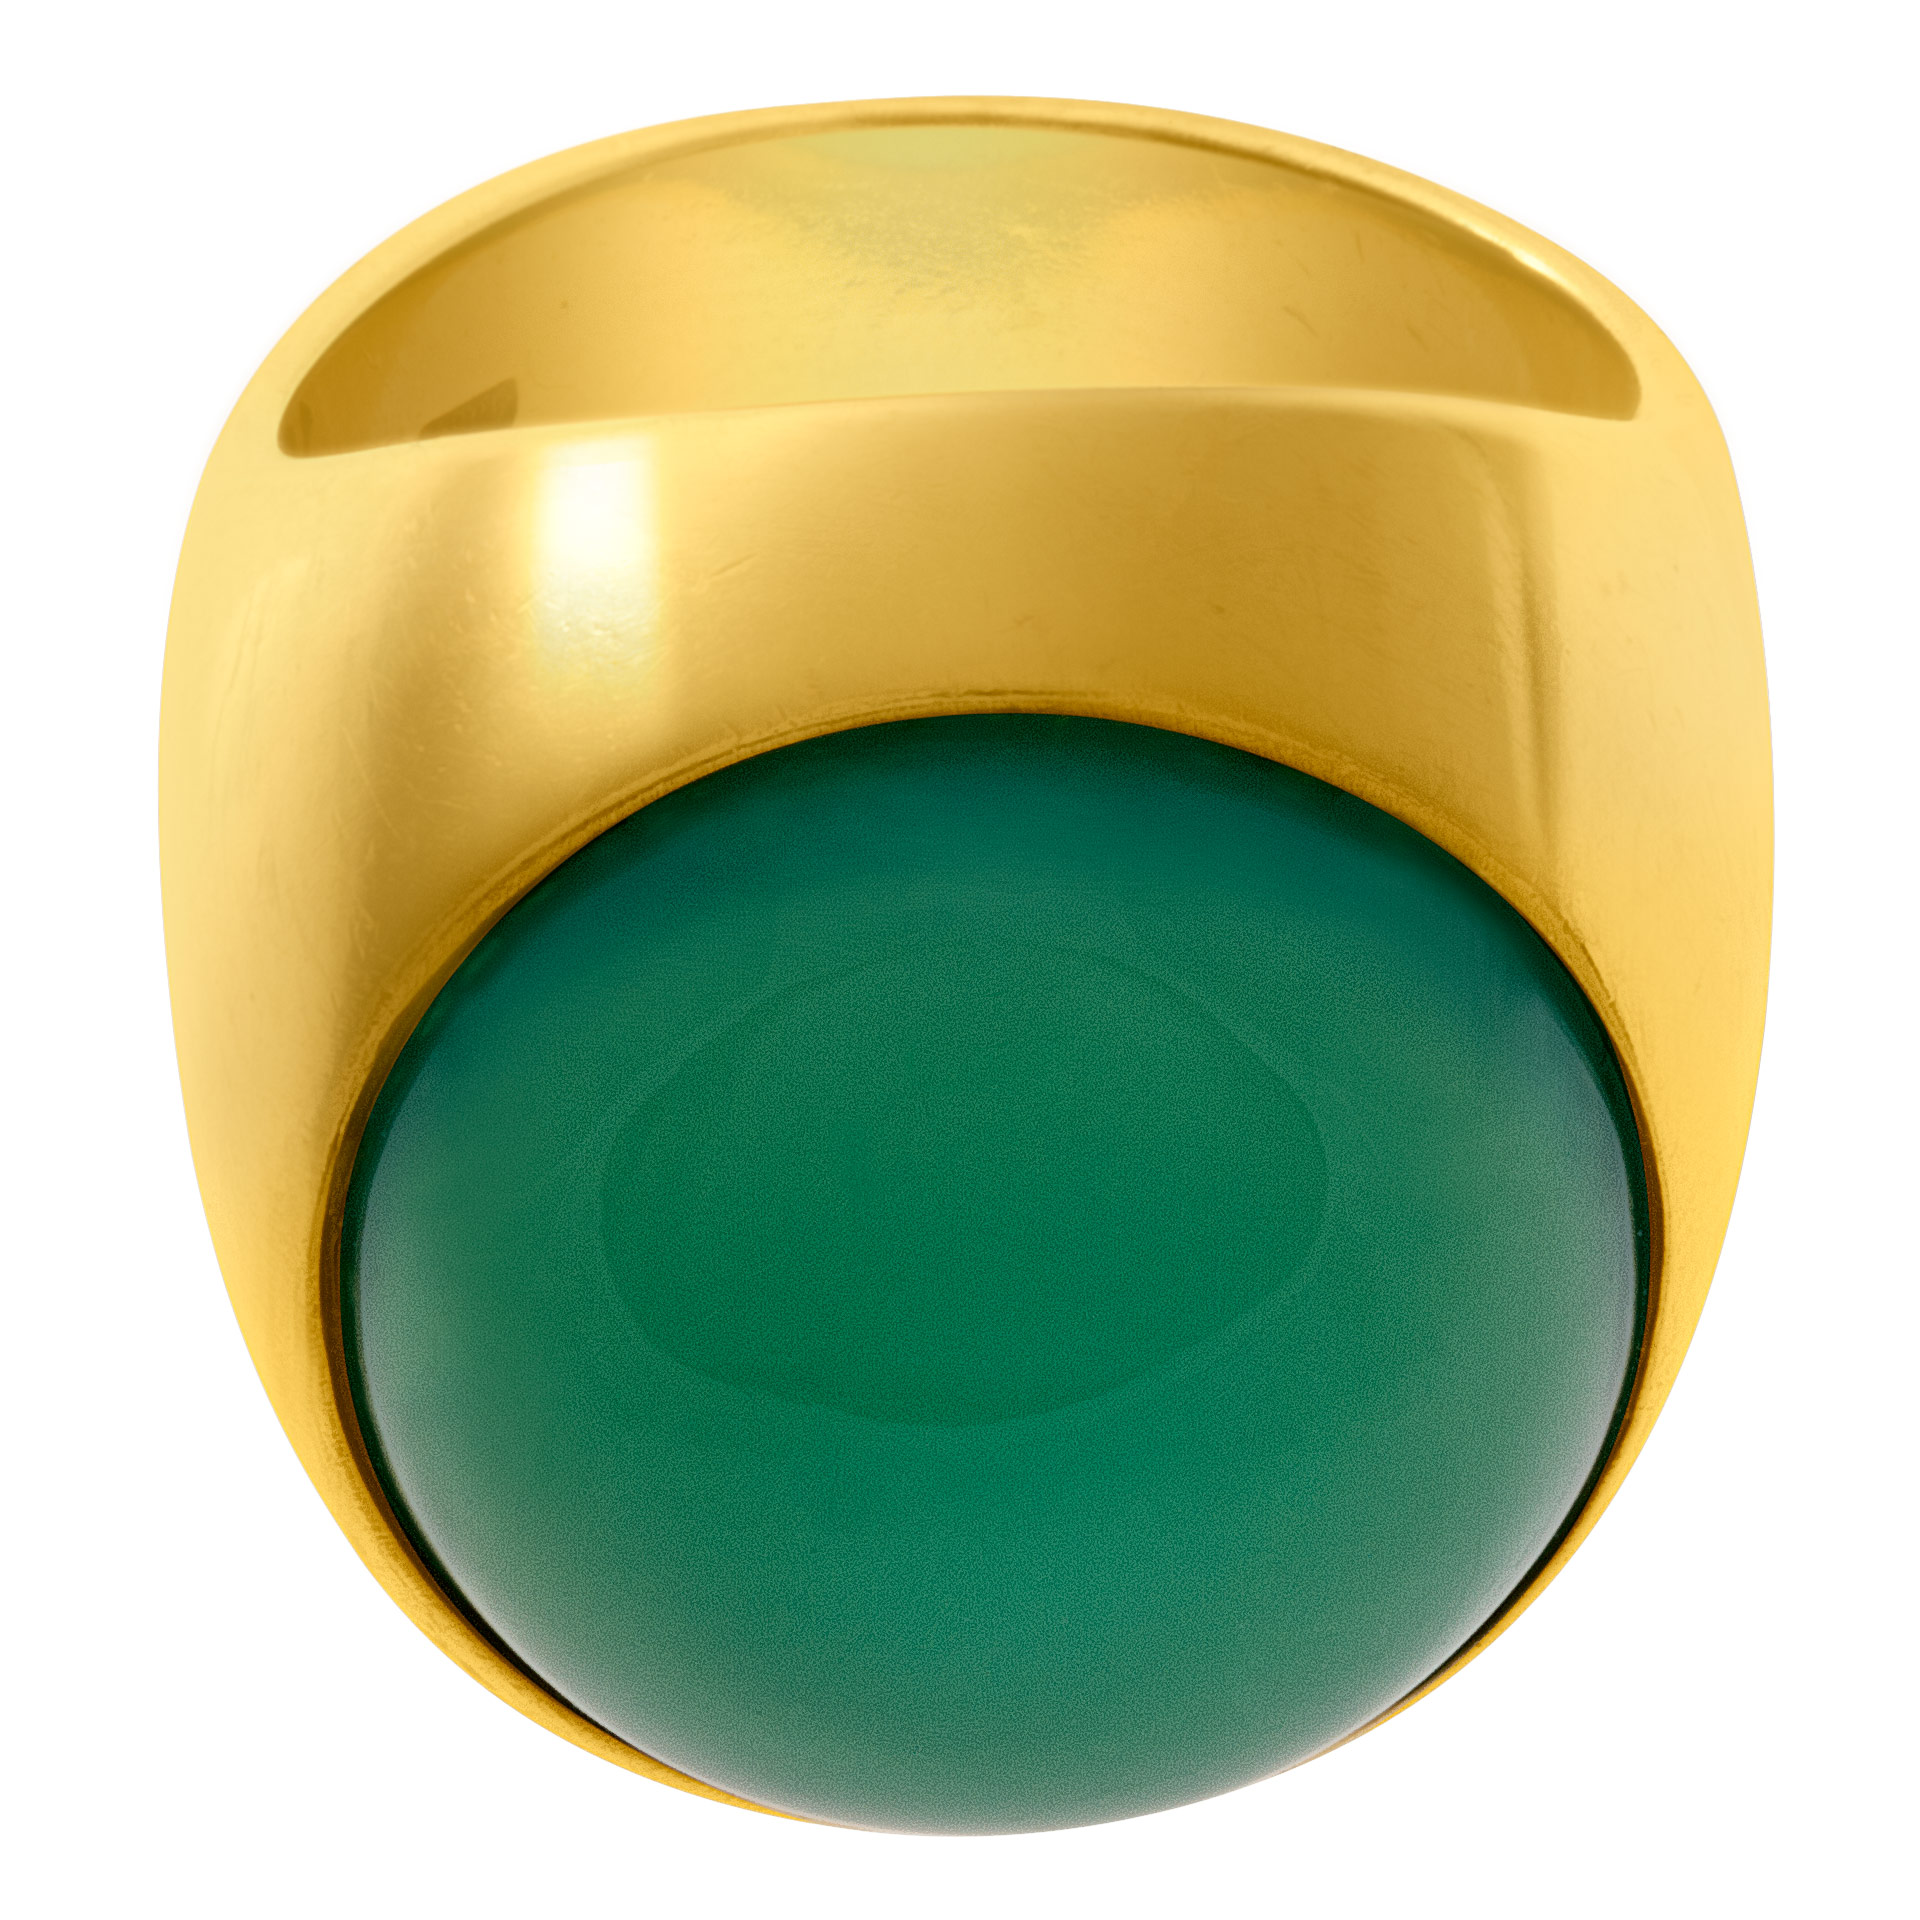 Jade cabachon stone ring in 18k with approx. 13cts